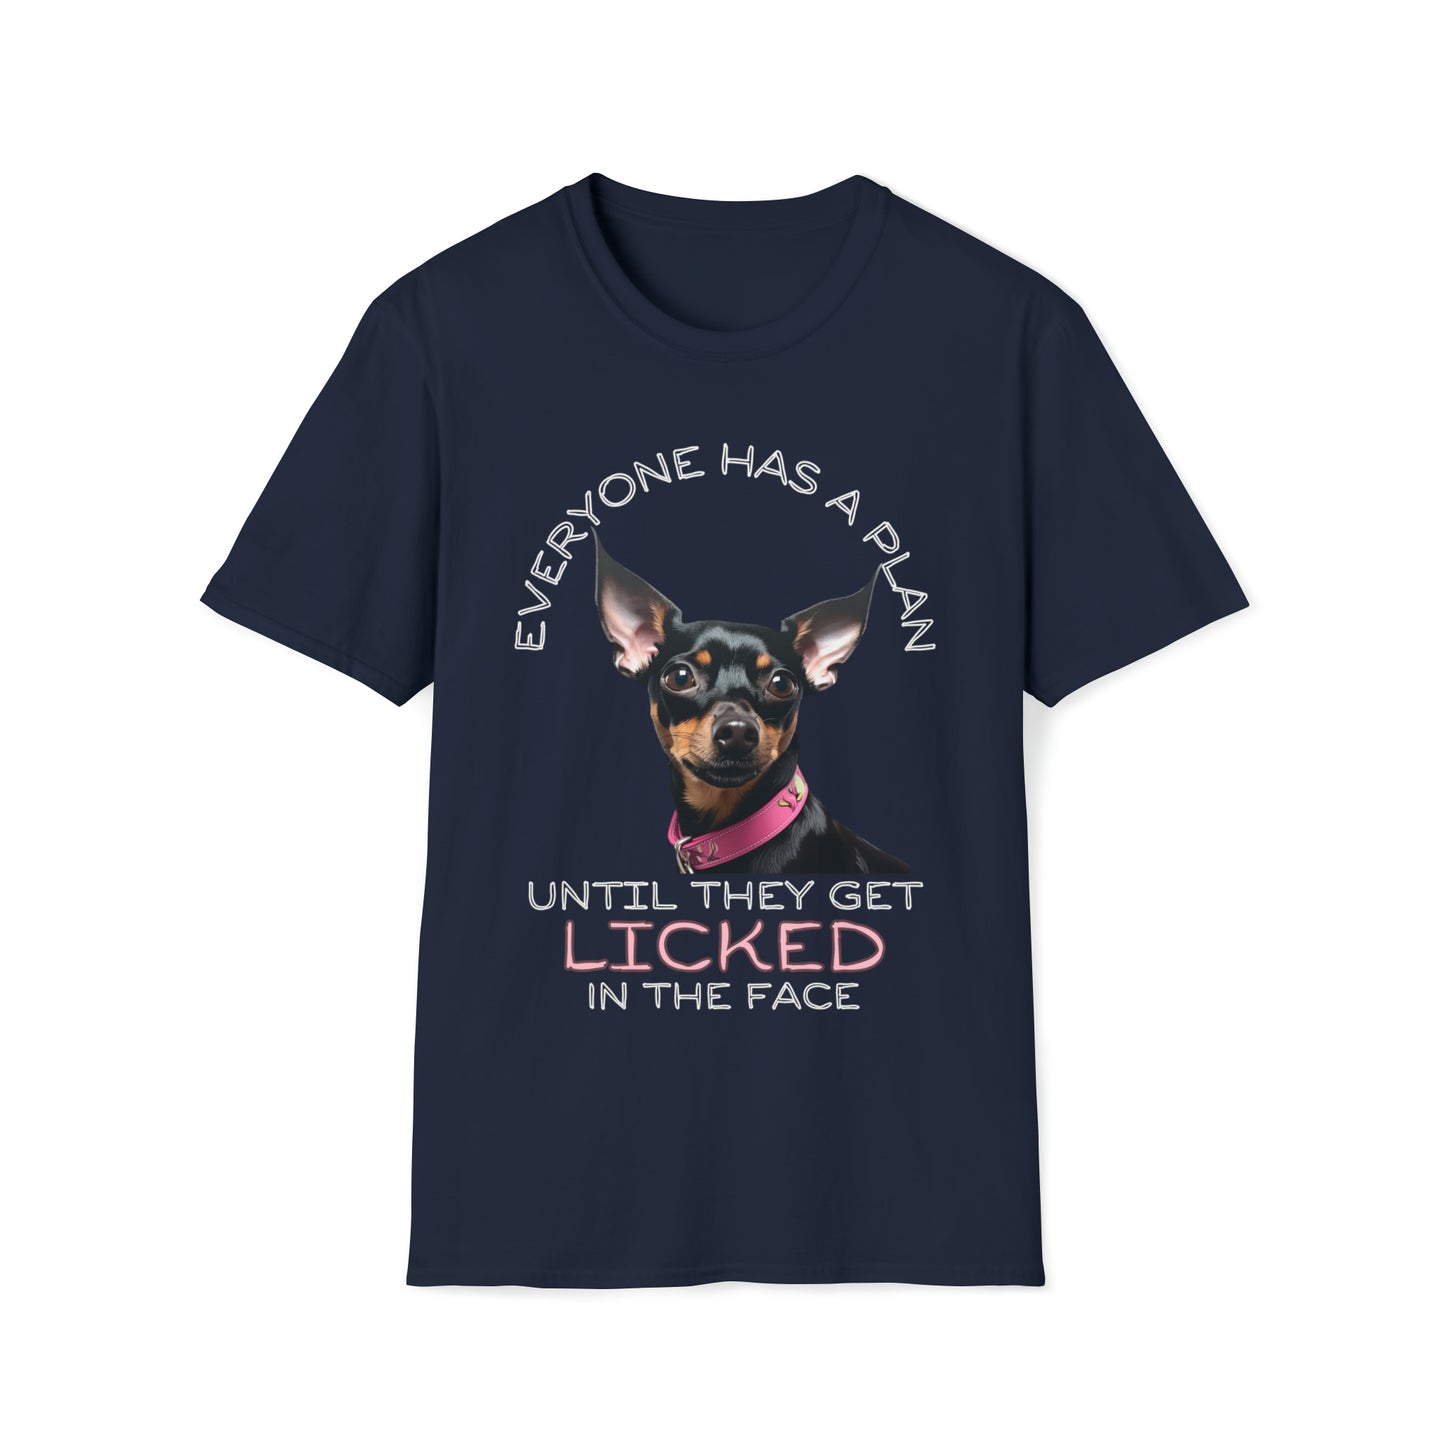 "Everyone Has a Plan Until They Get Licked in the Face" (Miniature Pinscher Edition) - Unisex Softstyle T-Shirt